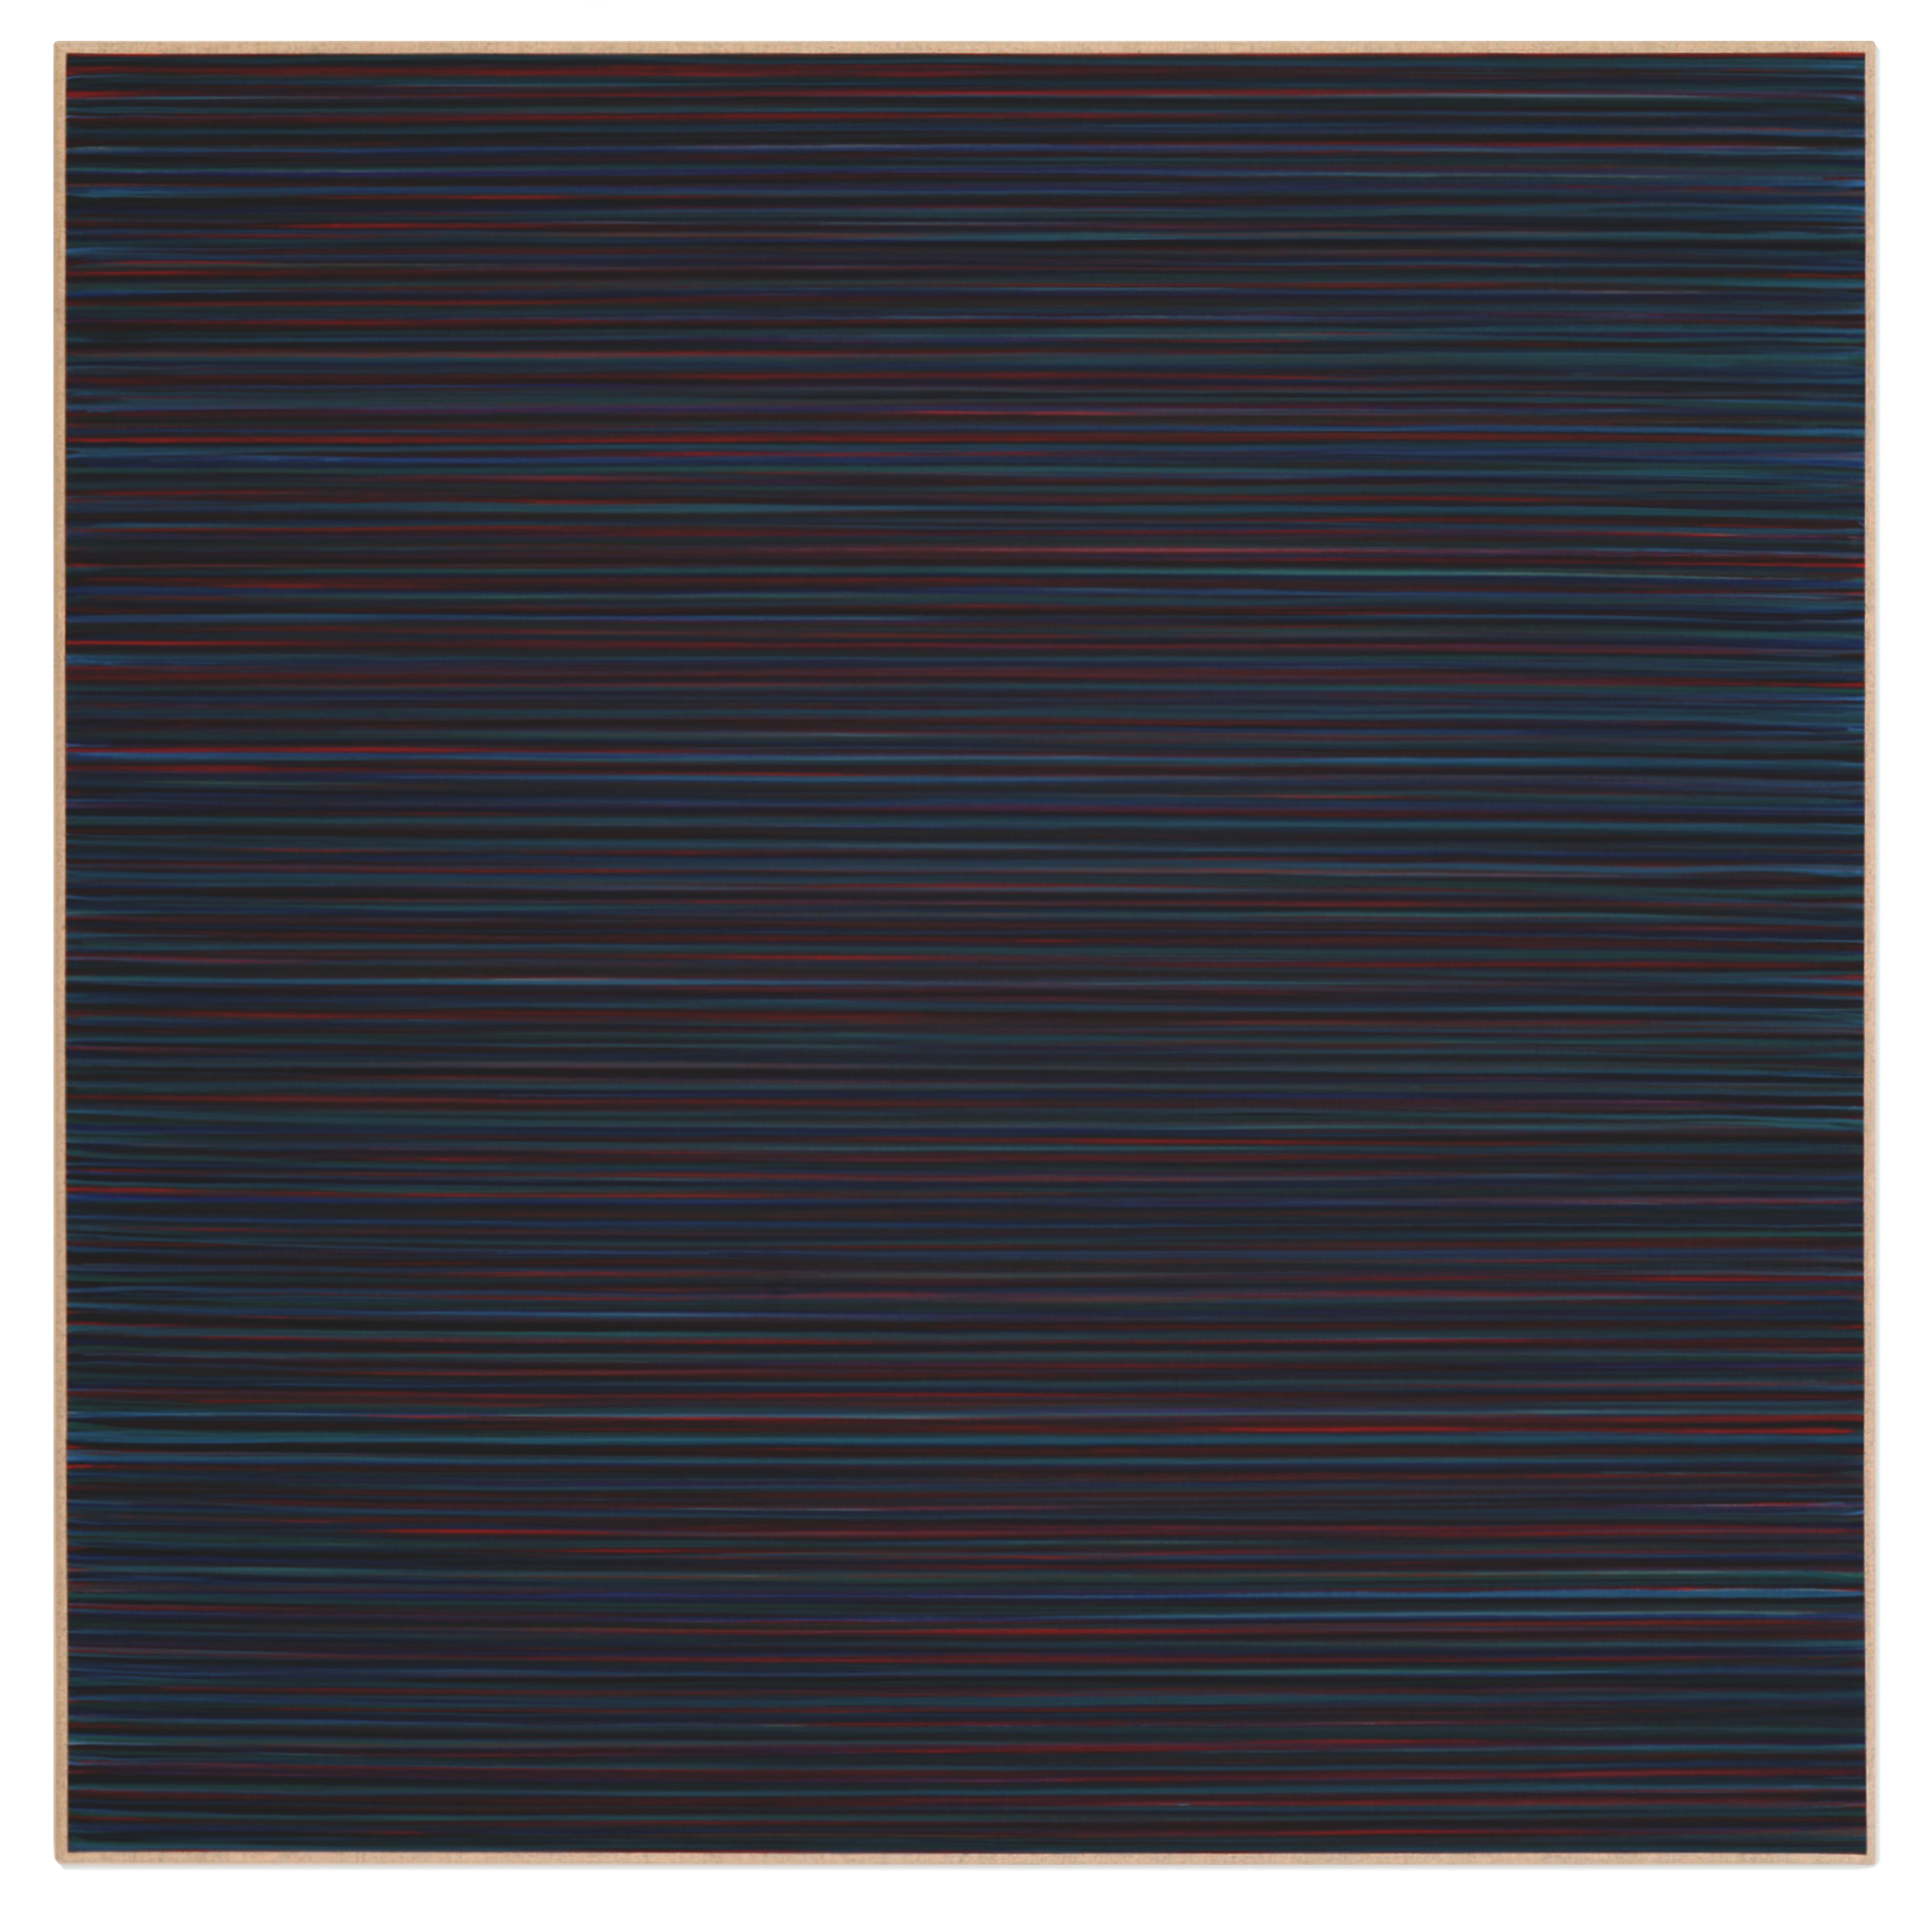 Untilted, 2014, 70x70 cm, 27.55x27.55 in